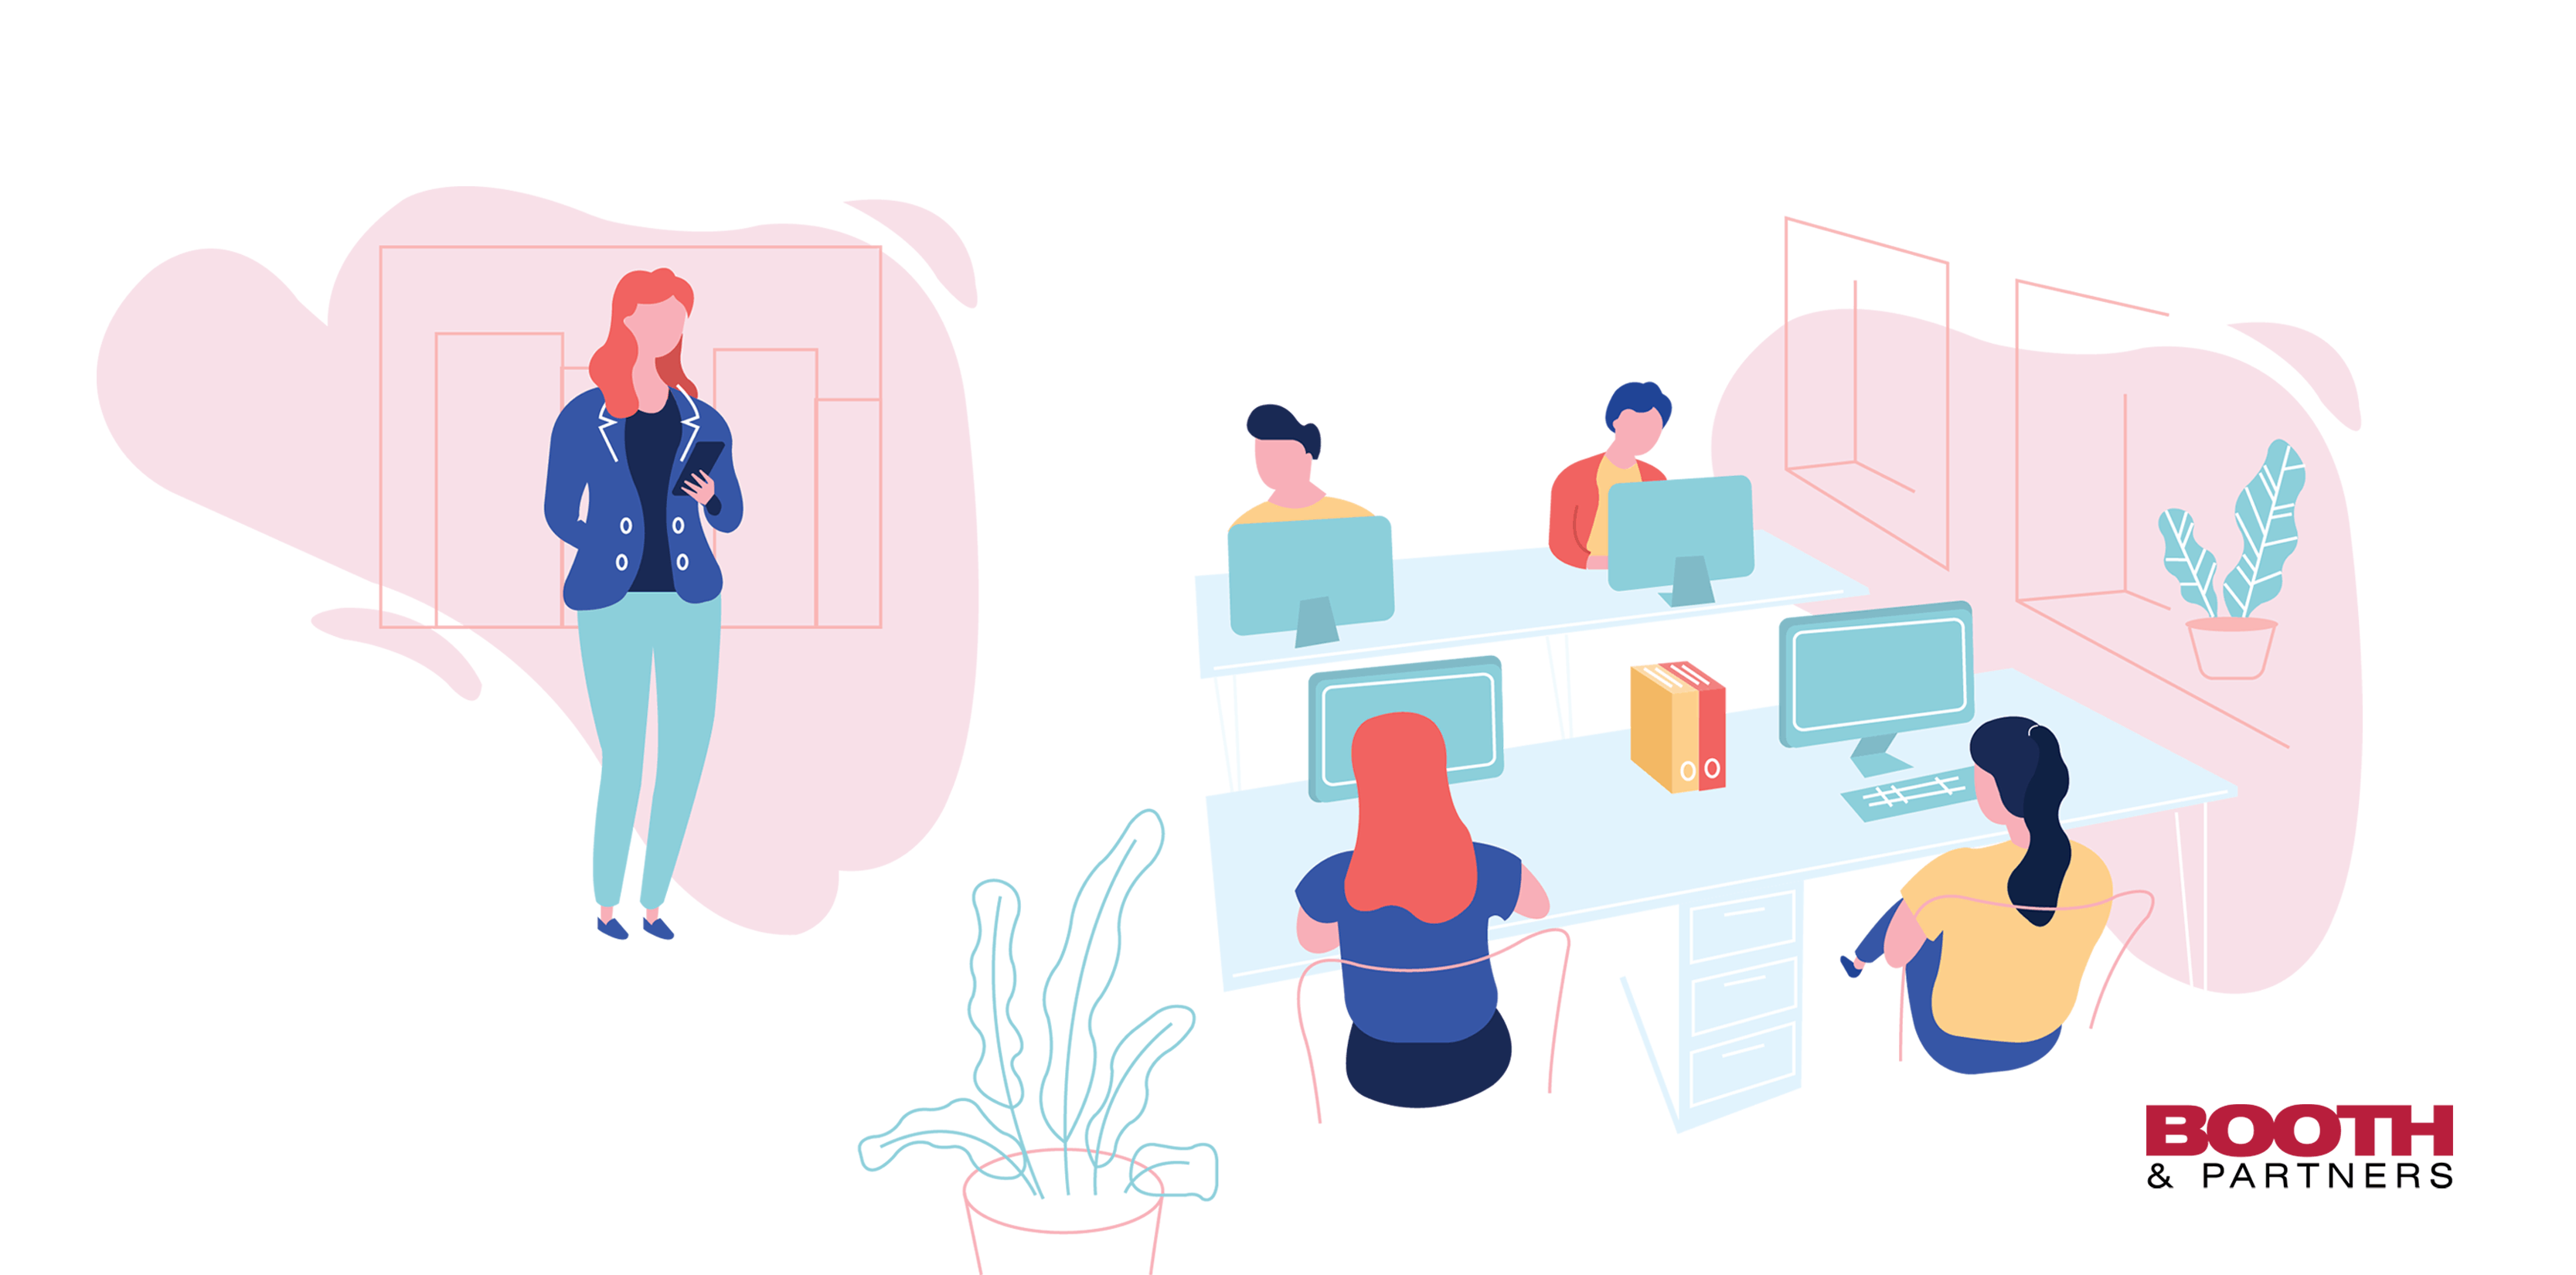 How to Communicate with your Remote Team in a Hyperconnected World